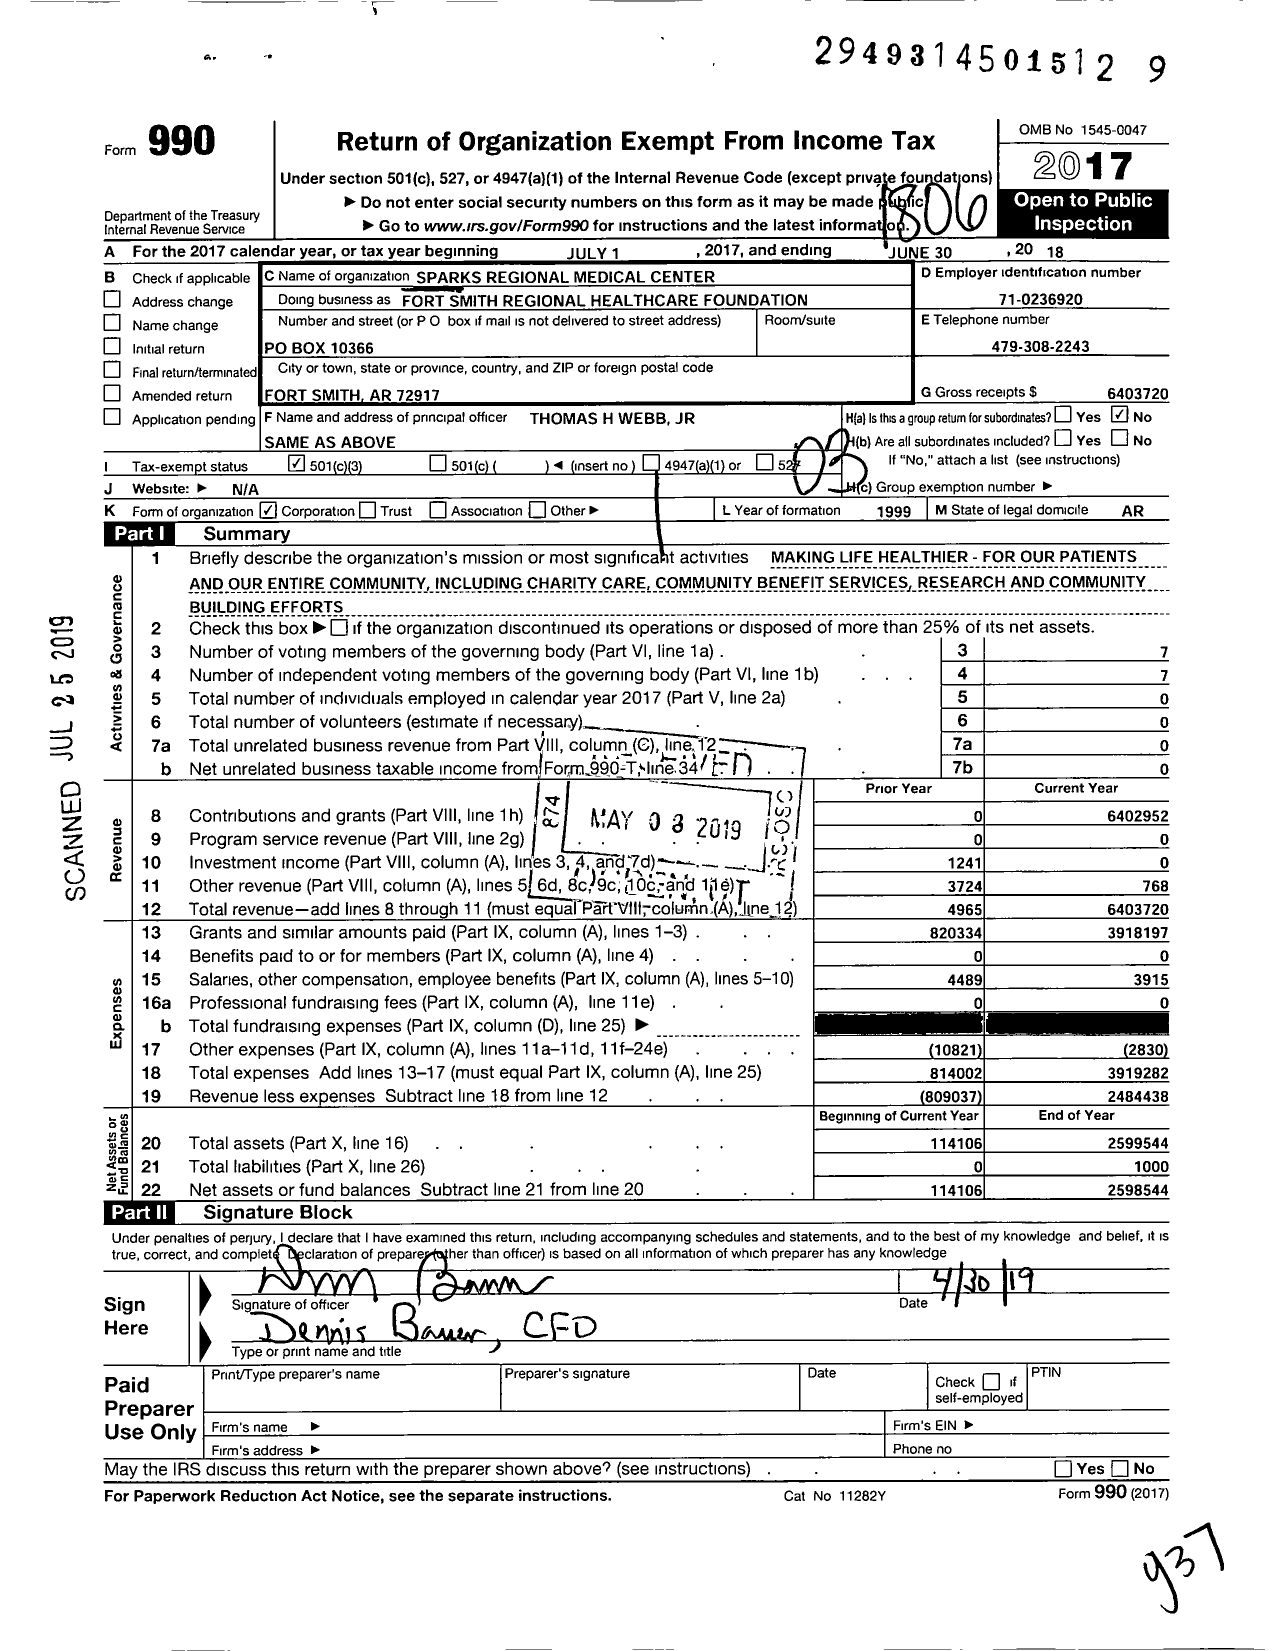 Image of first page of 2017 Form 990 for Fort Smith Regional Healthcare Foundation / Sparks Regional Medical Center